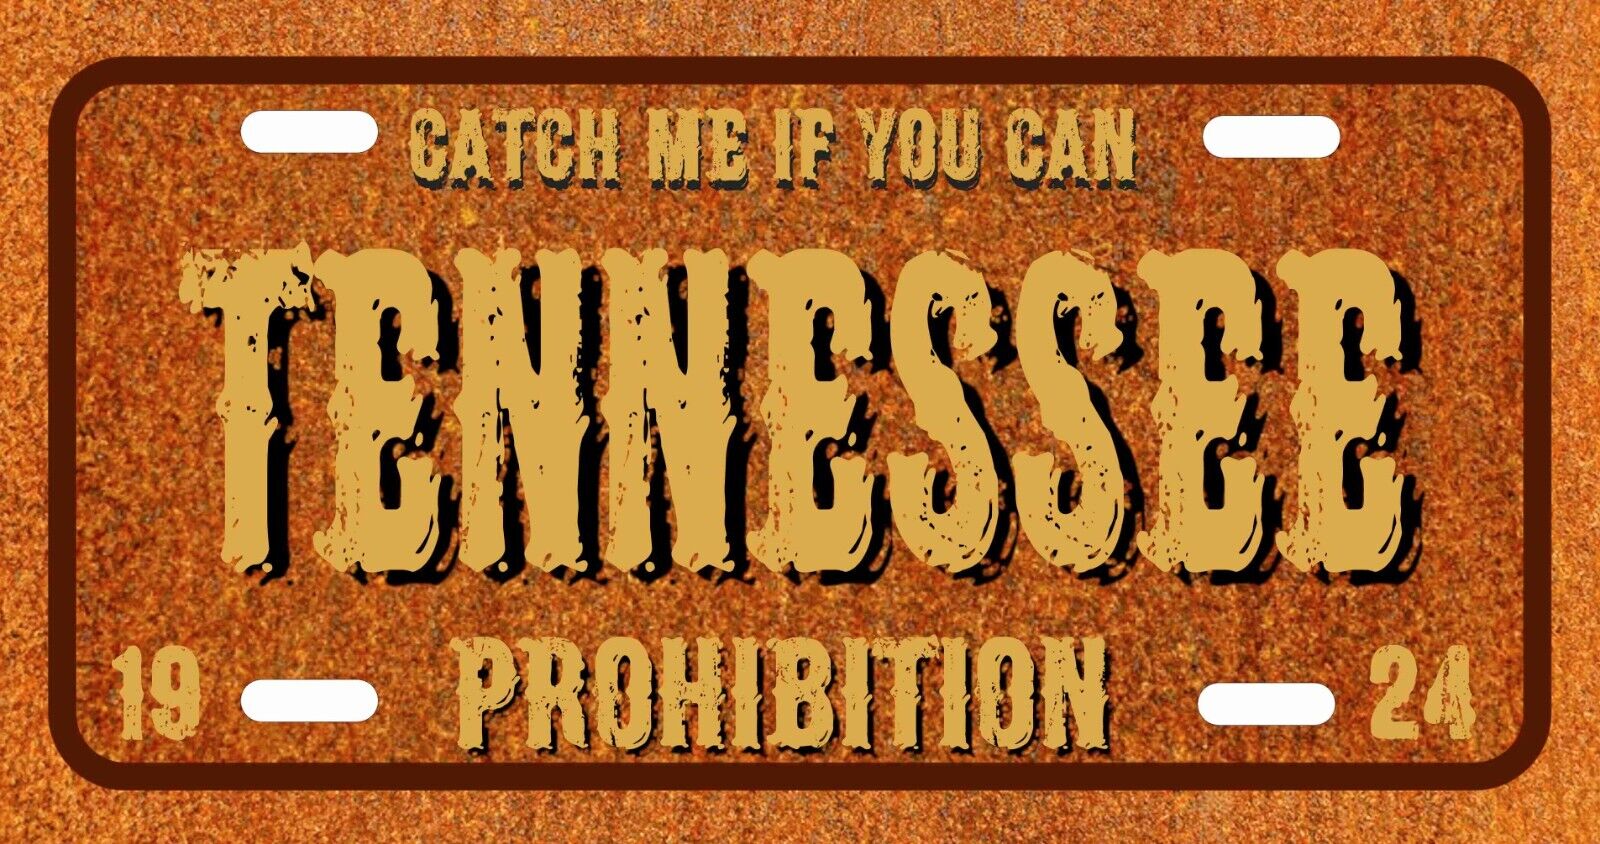 Catch me if you can Prohibition 1924 Tennessee Car Truck  license plate Vintage